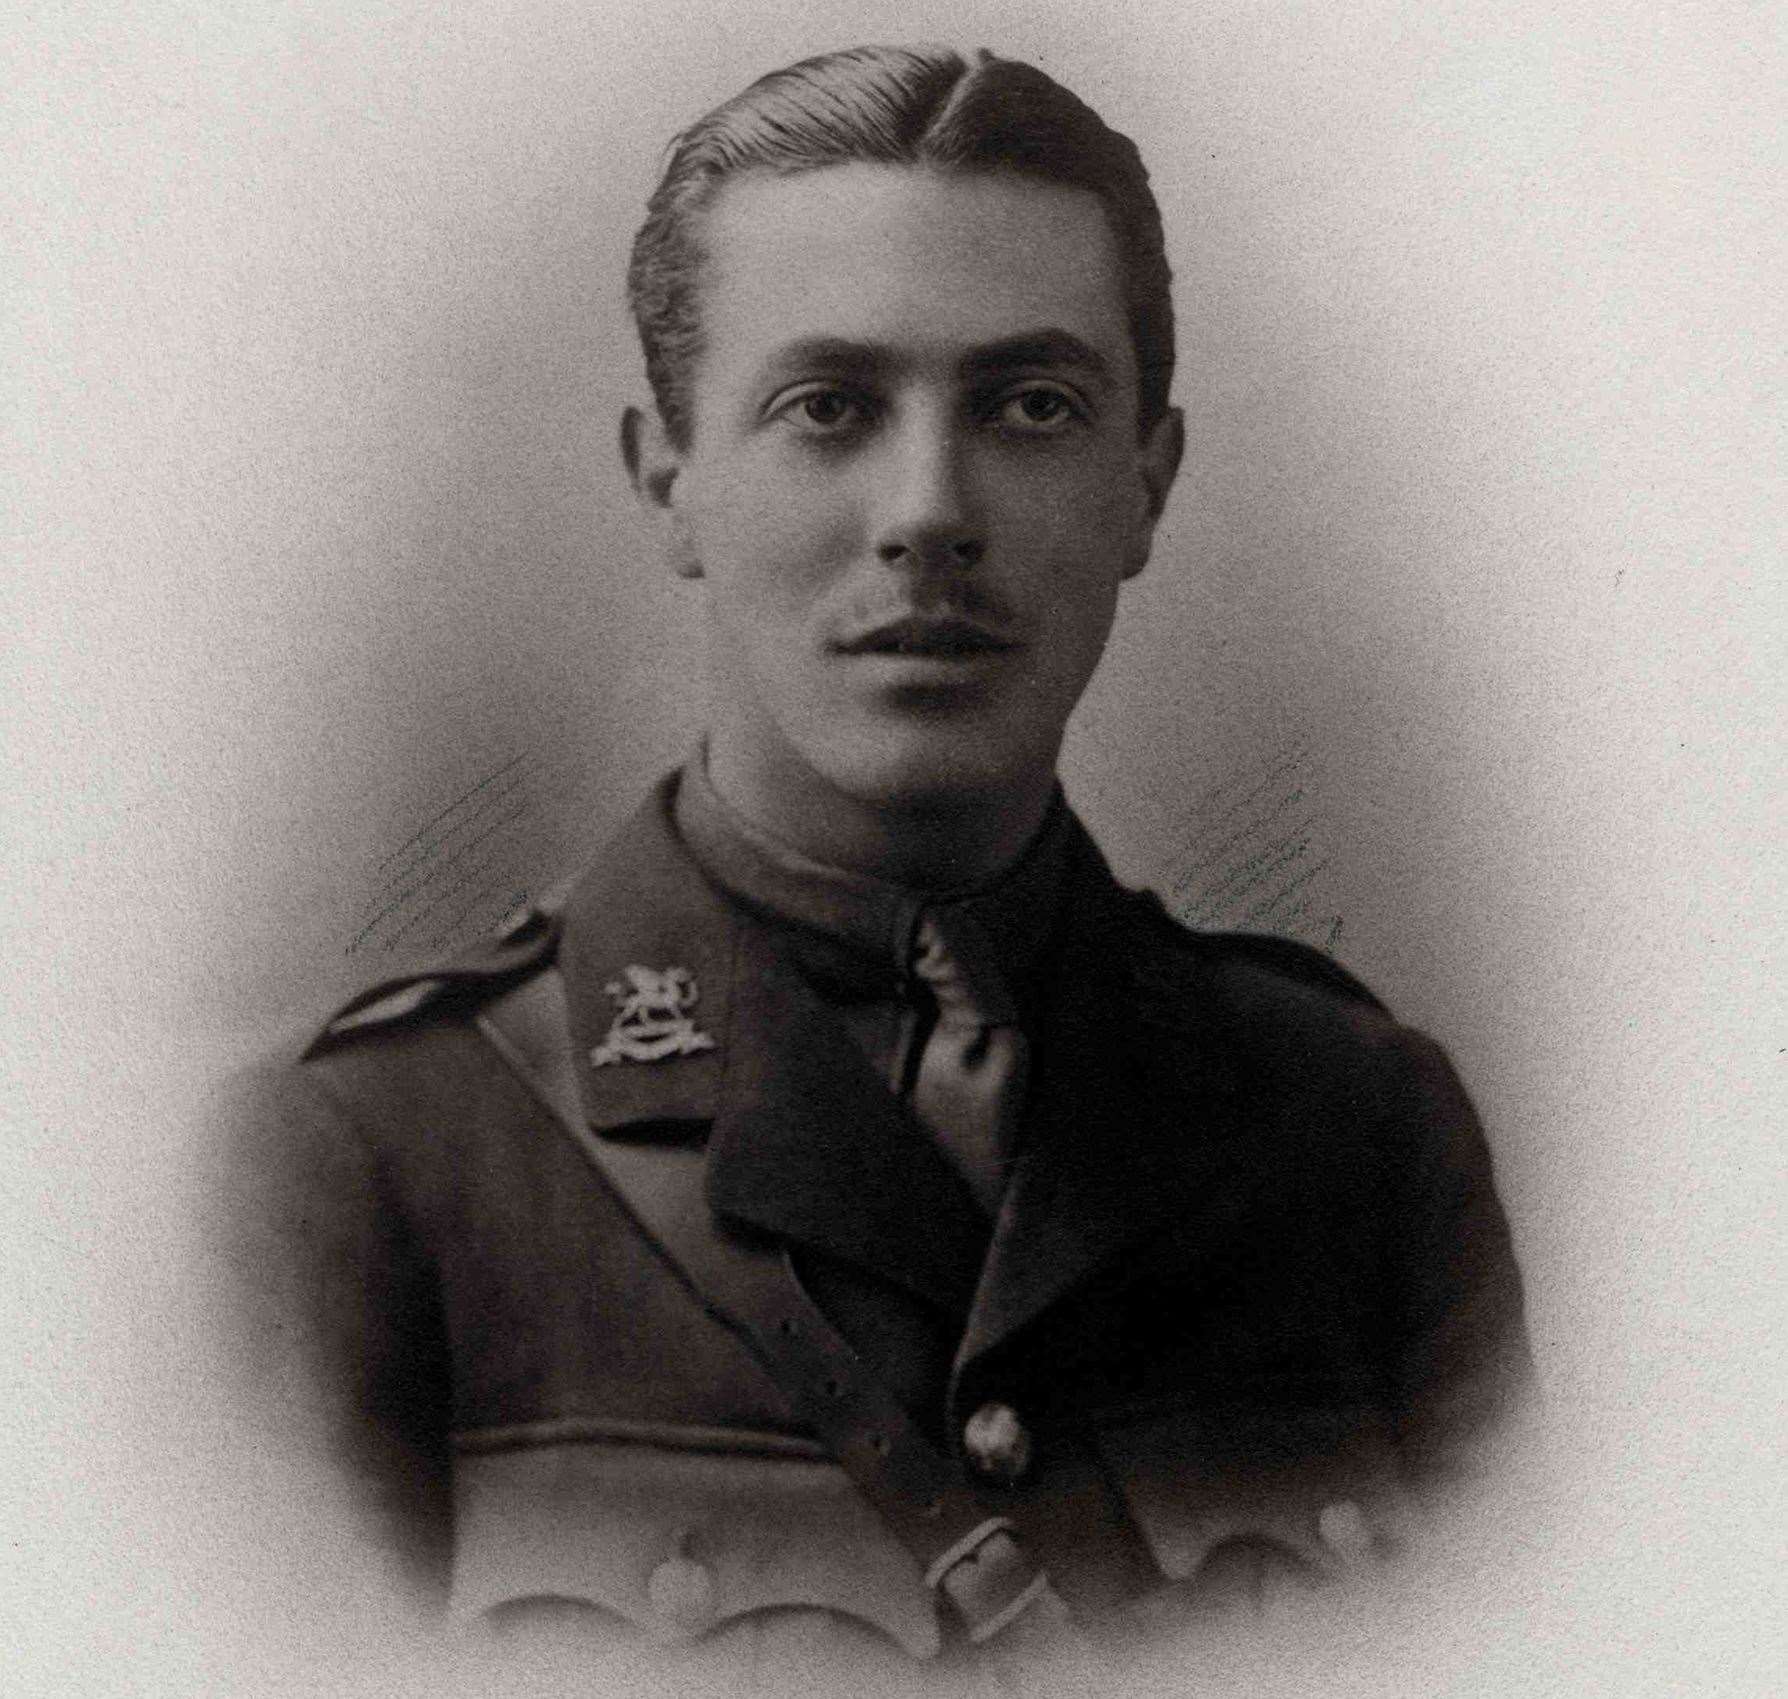 Guy Bracher died at the Battle of the Somme